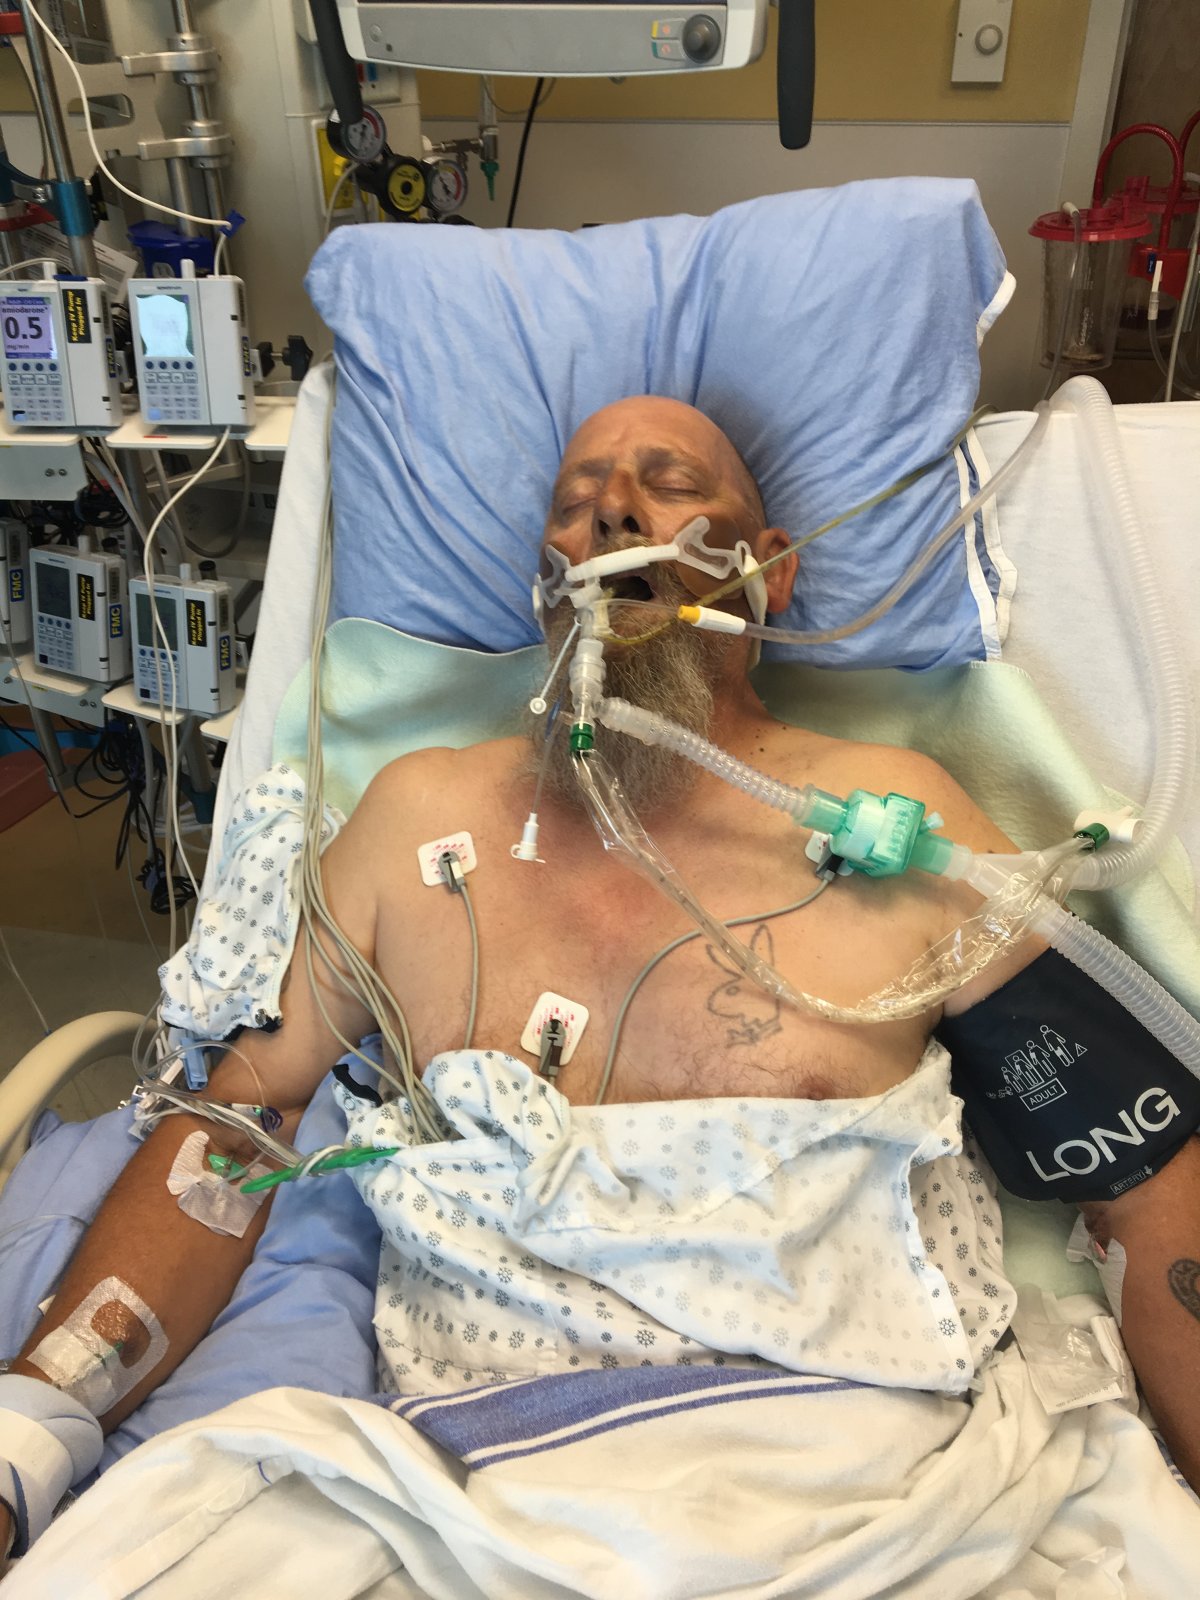 It's believed 63-year-old Clause Pigeault was hit on his motorcycle over the weekend by a driver who fled the scene.